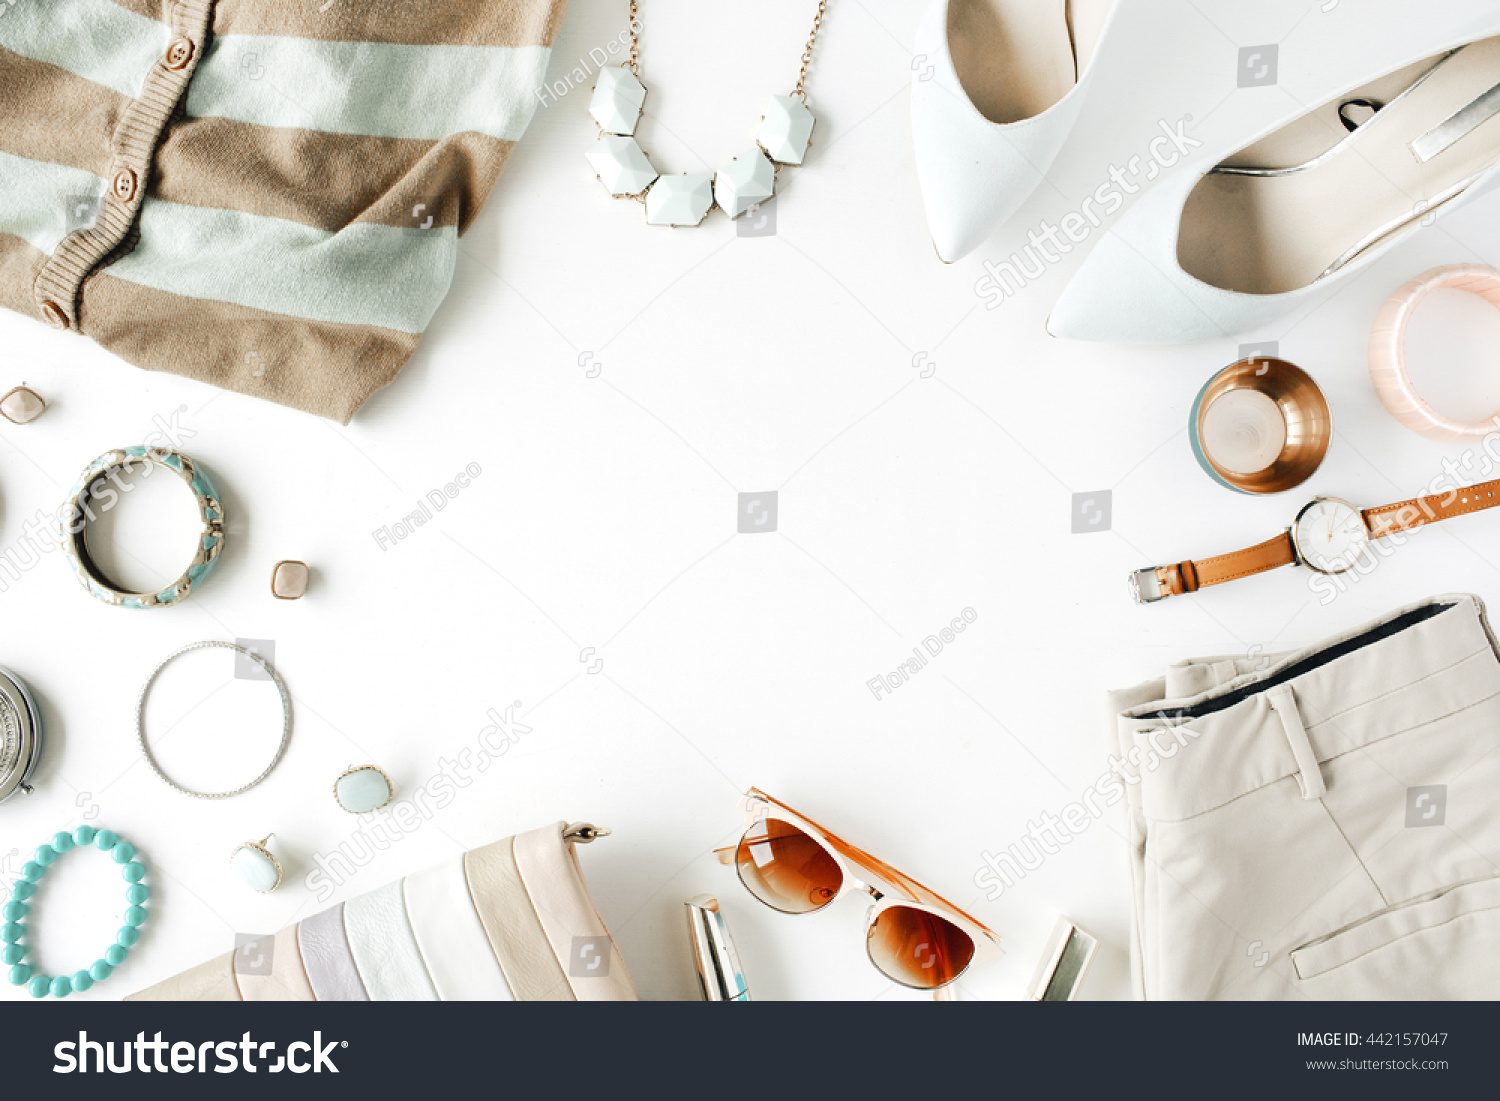 Flat Lay Feminine Clothes Accessories Collage Stock Photo 442157047 ...